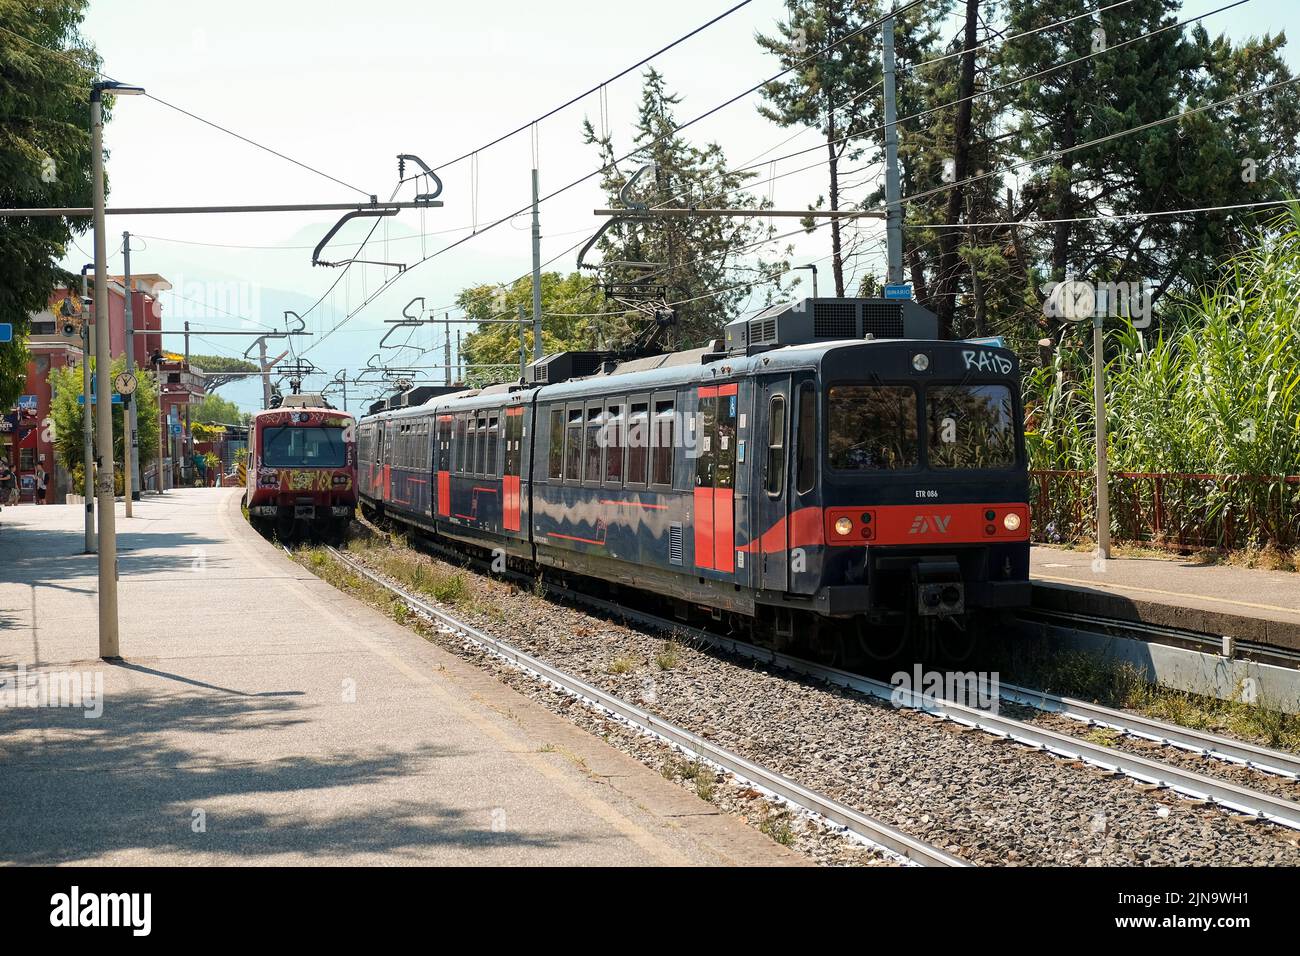 Two trains in bound - out bound at Pompeii Train station. Trains commute from Sorrento to Naples stopping at tourist spots on the way. Stock Photo